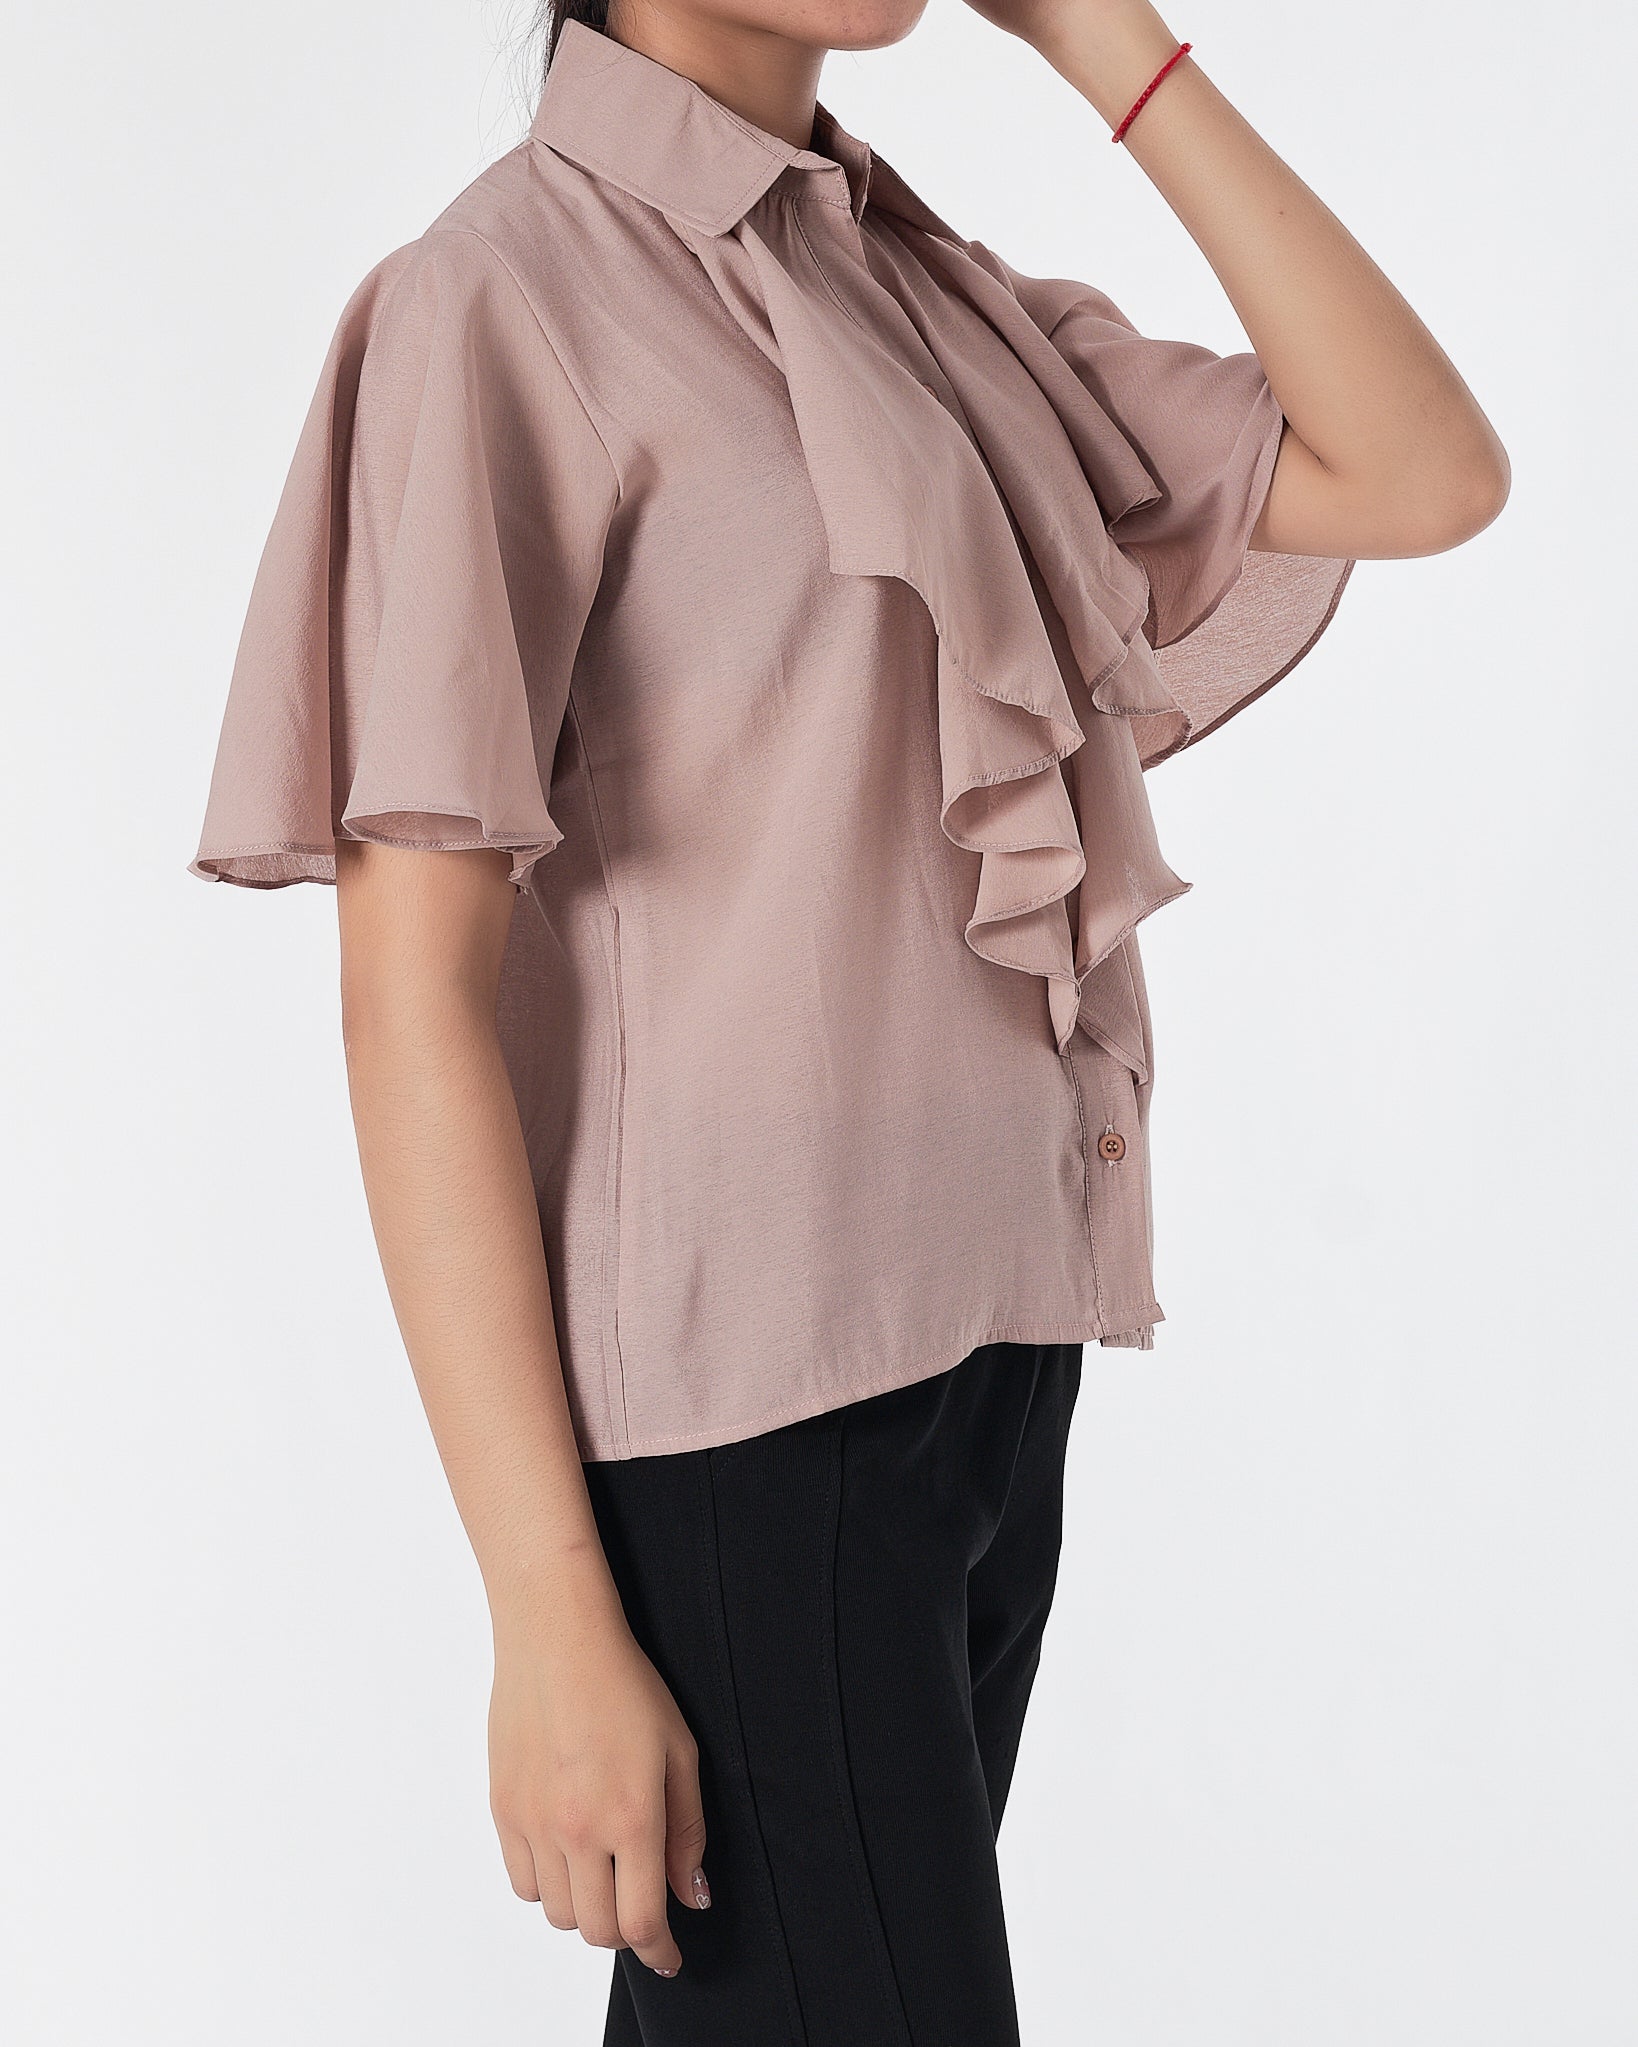 Lady Coral  Blouse 14.90